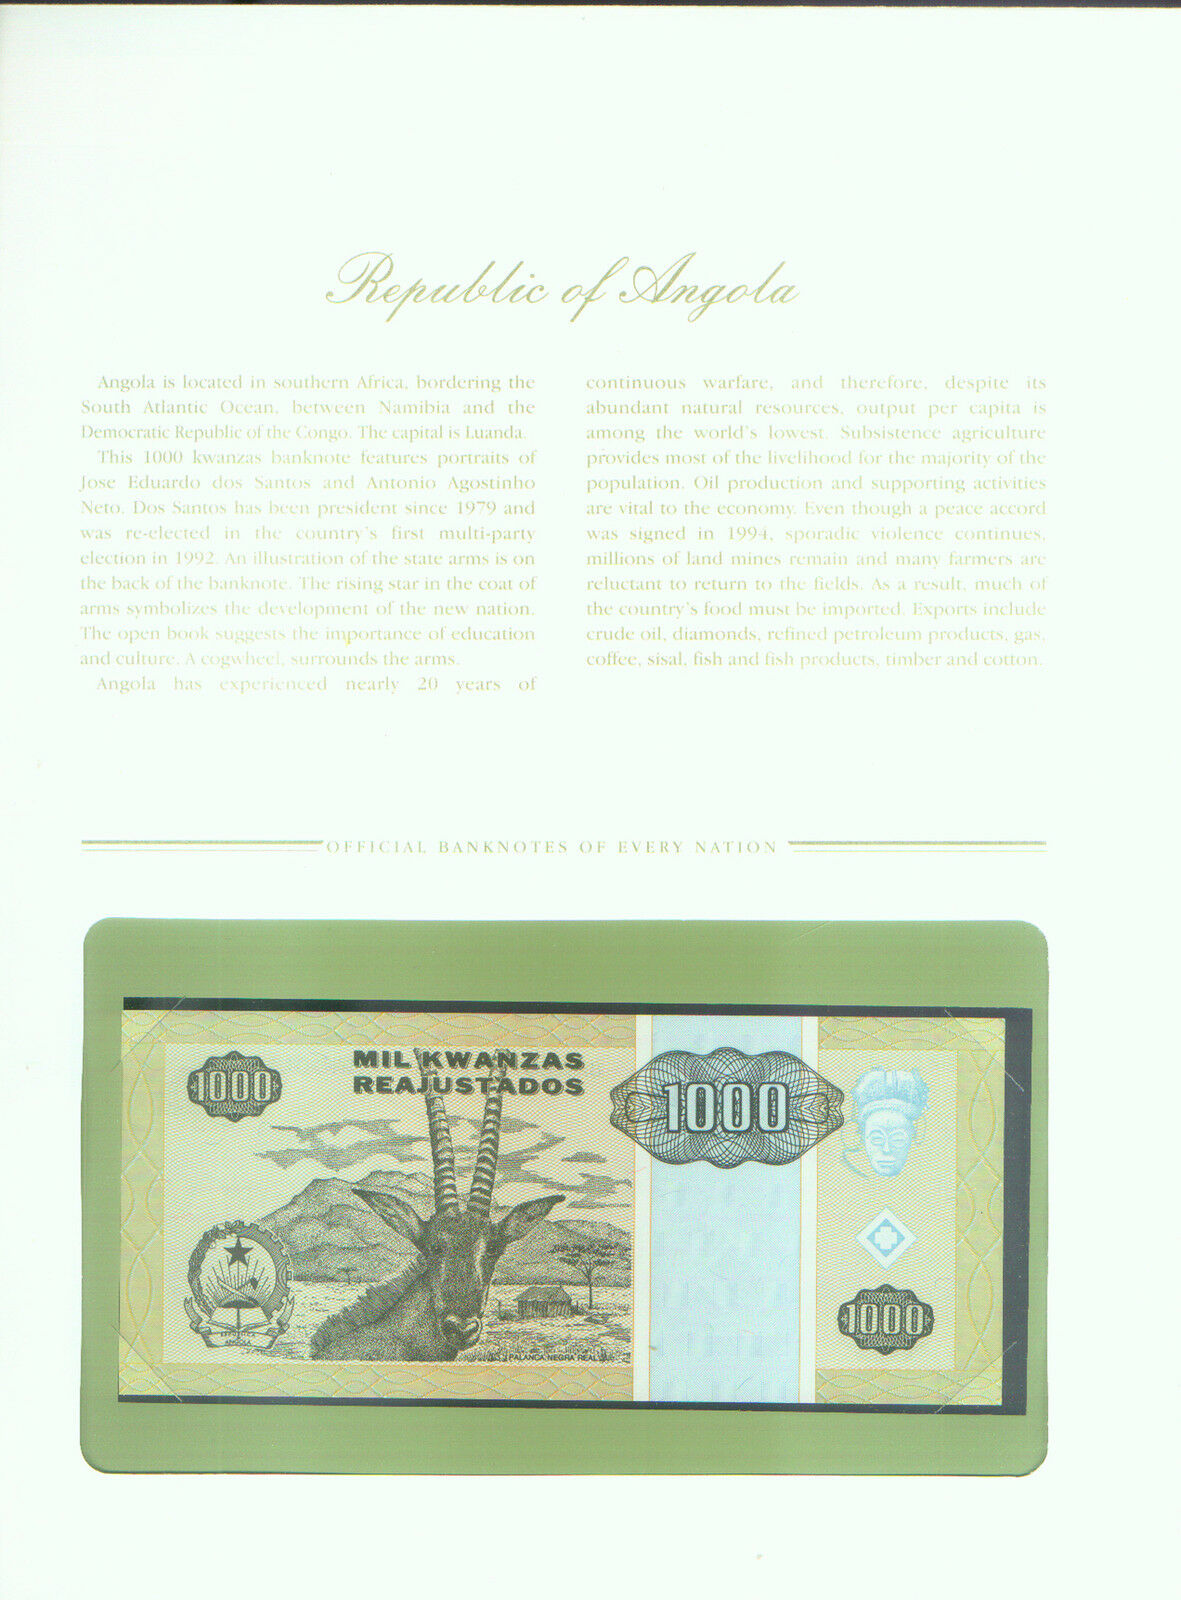 ANGOLA BANK NOTE 1000 KWANZAS of 1995 STAMPED WINDOWED ENVELOPE with MAP & INFO